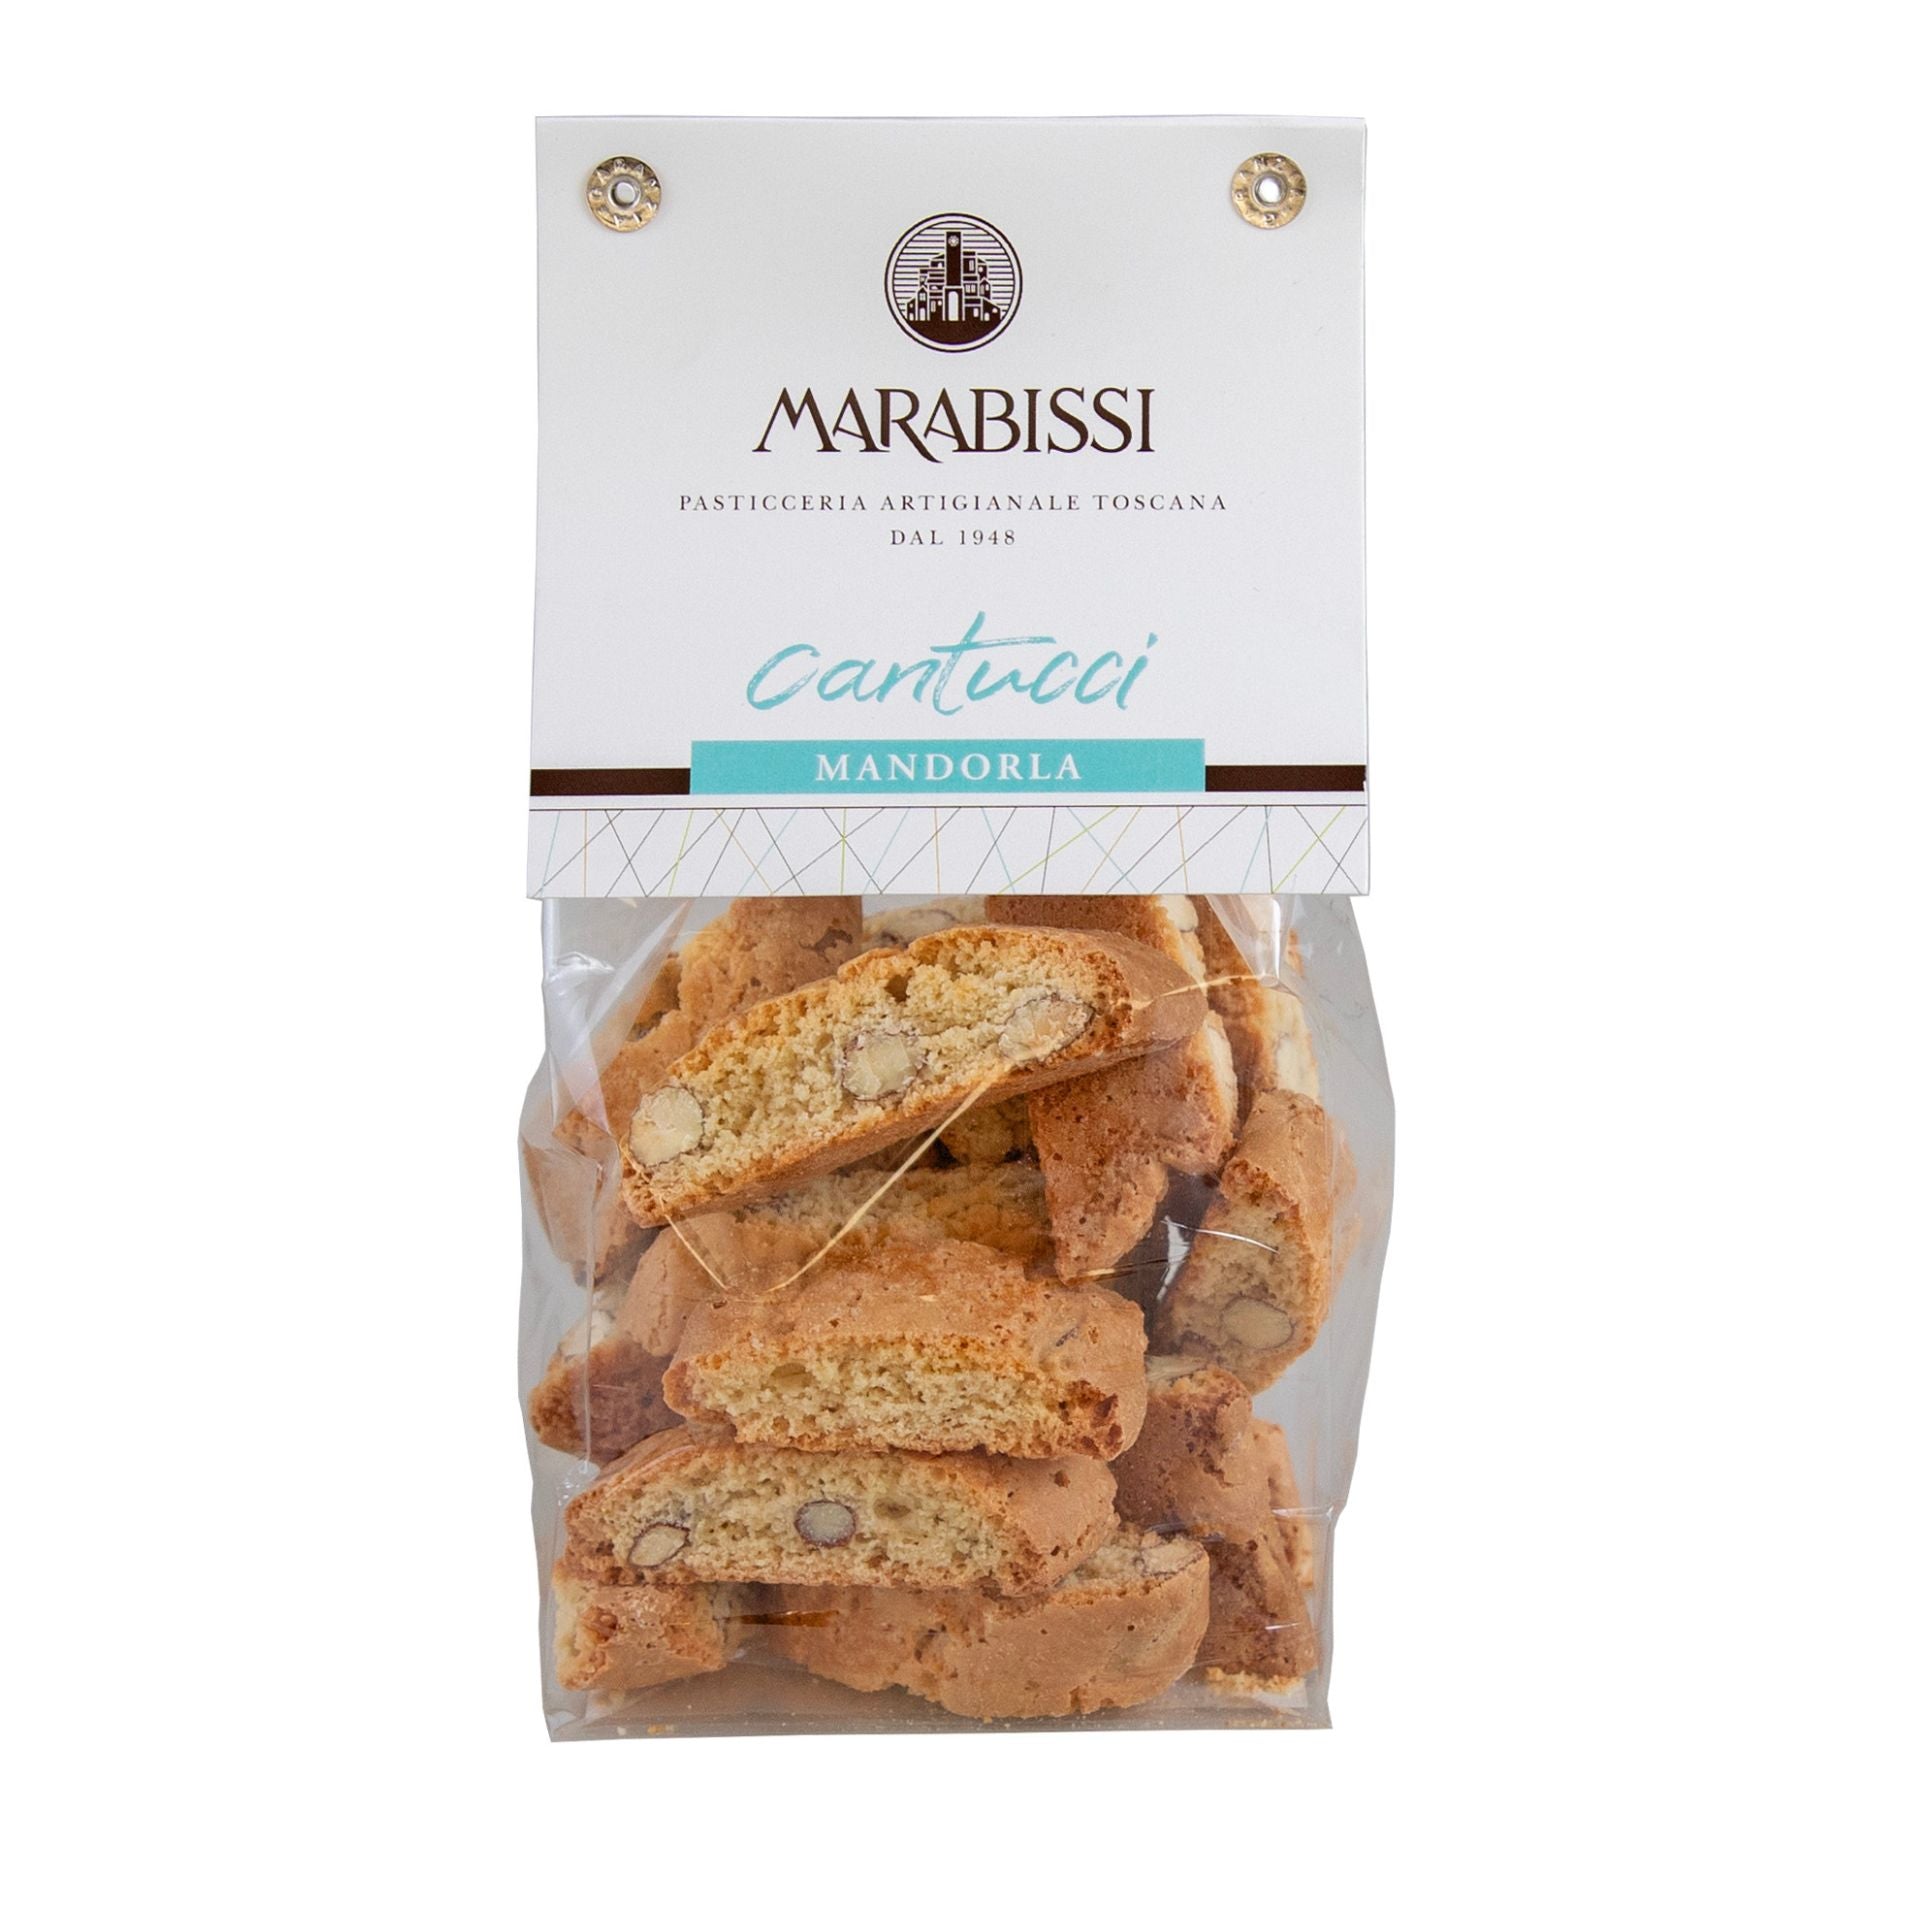 Marabissi Almond Cantucci (Bag) 200g  | Imported and distributed in the UK by Just Gourmet Foods